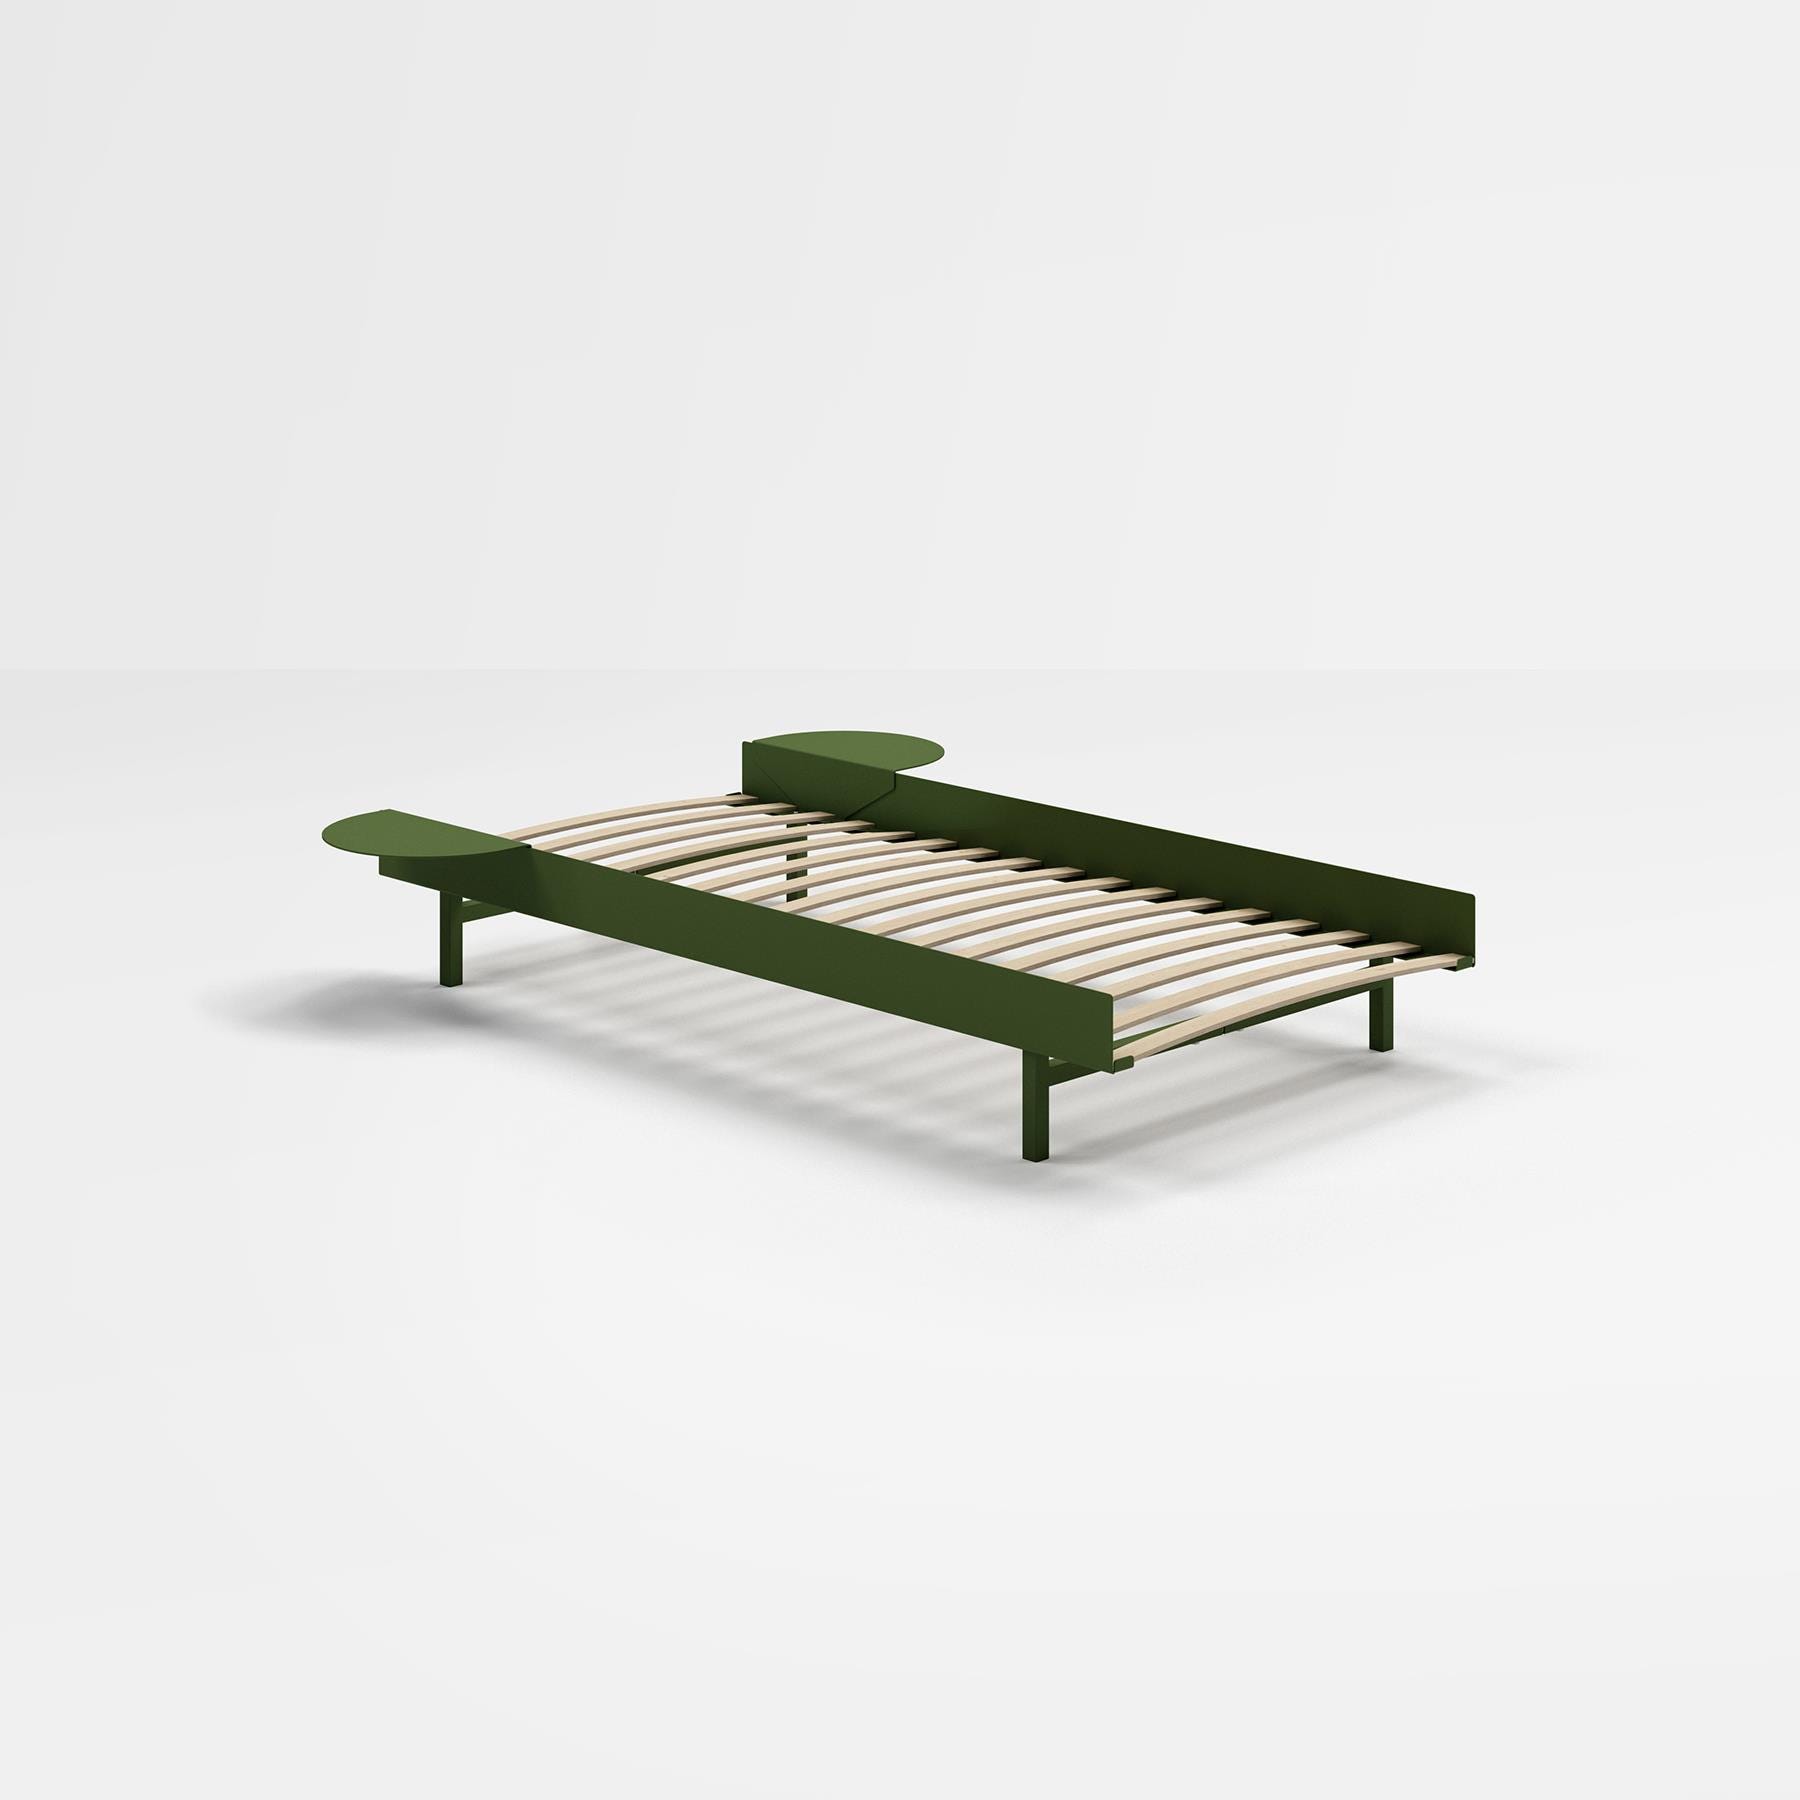 Moebe Bed Single Pine Green 2 Side Tables Green Designer Furniture From Holloways Of Ludlow